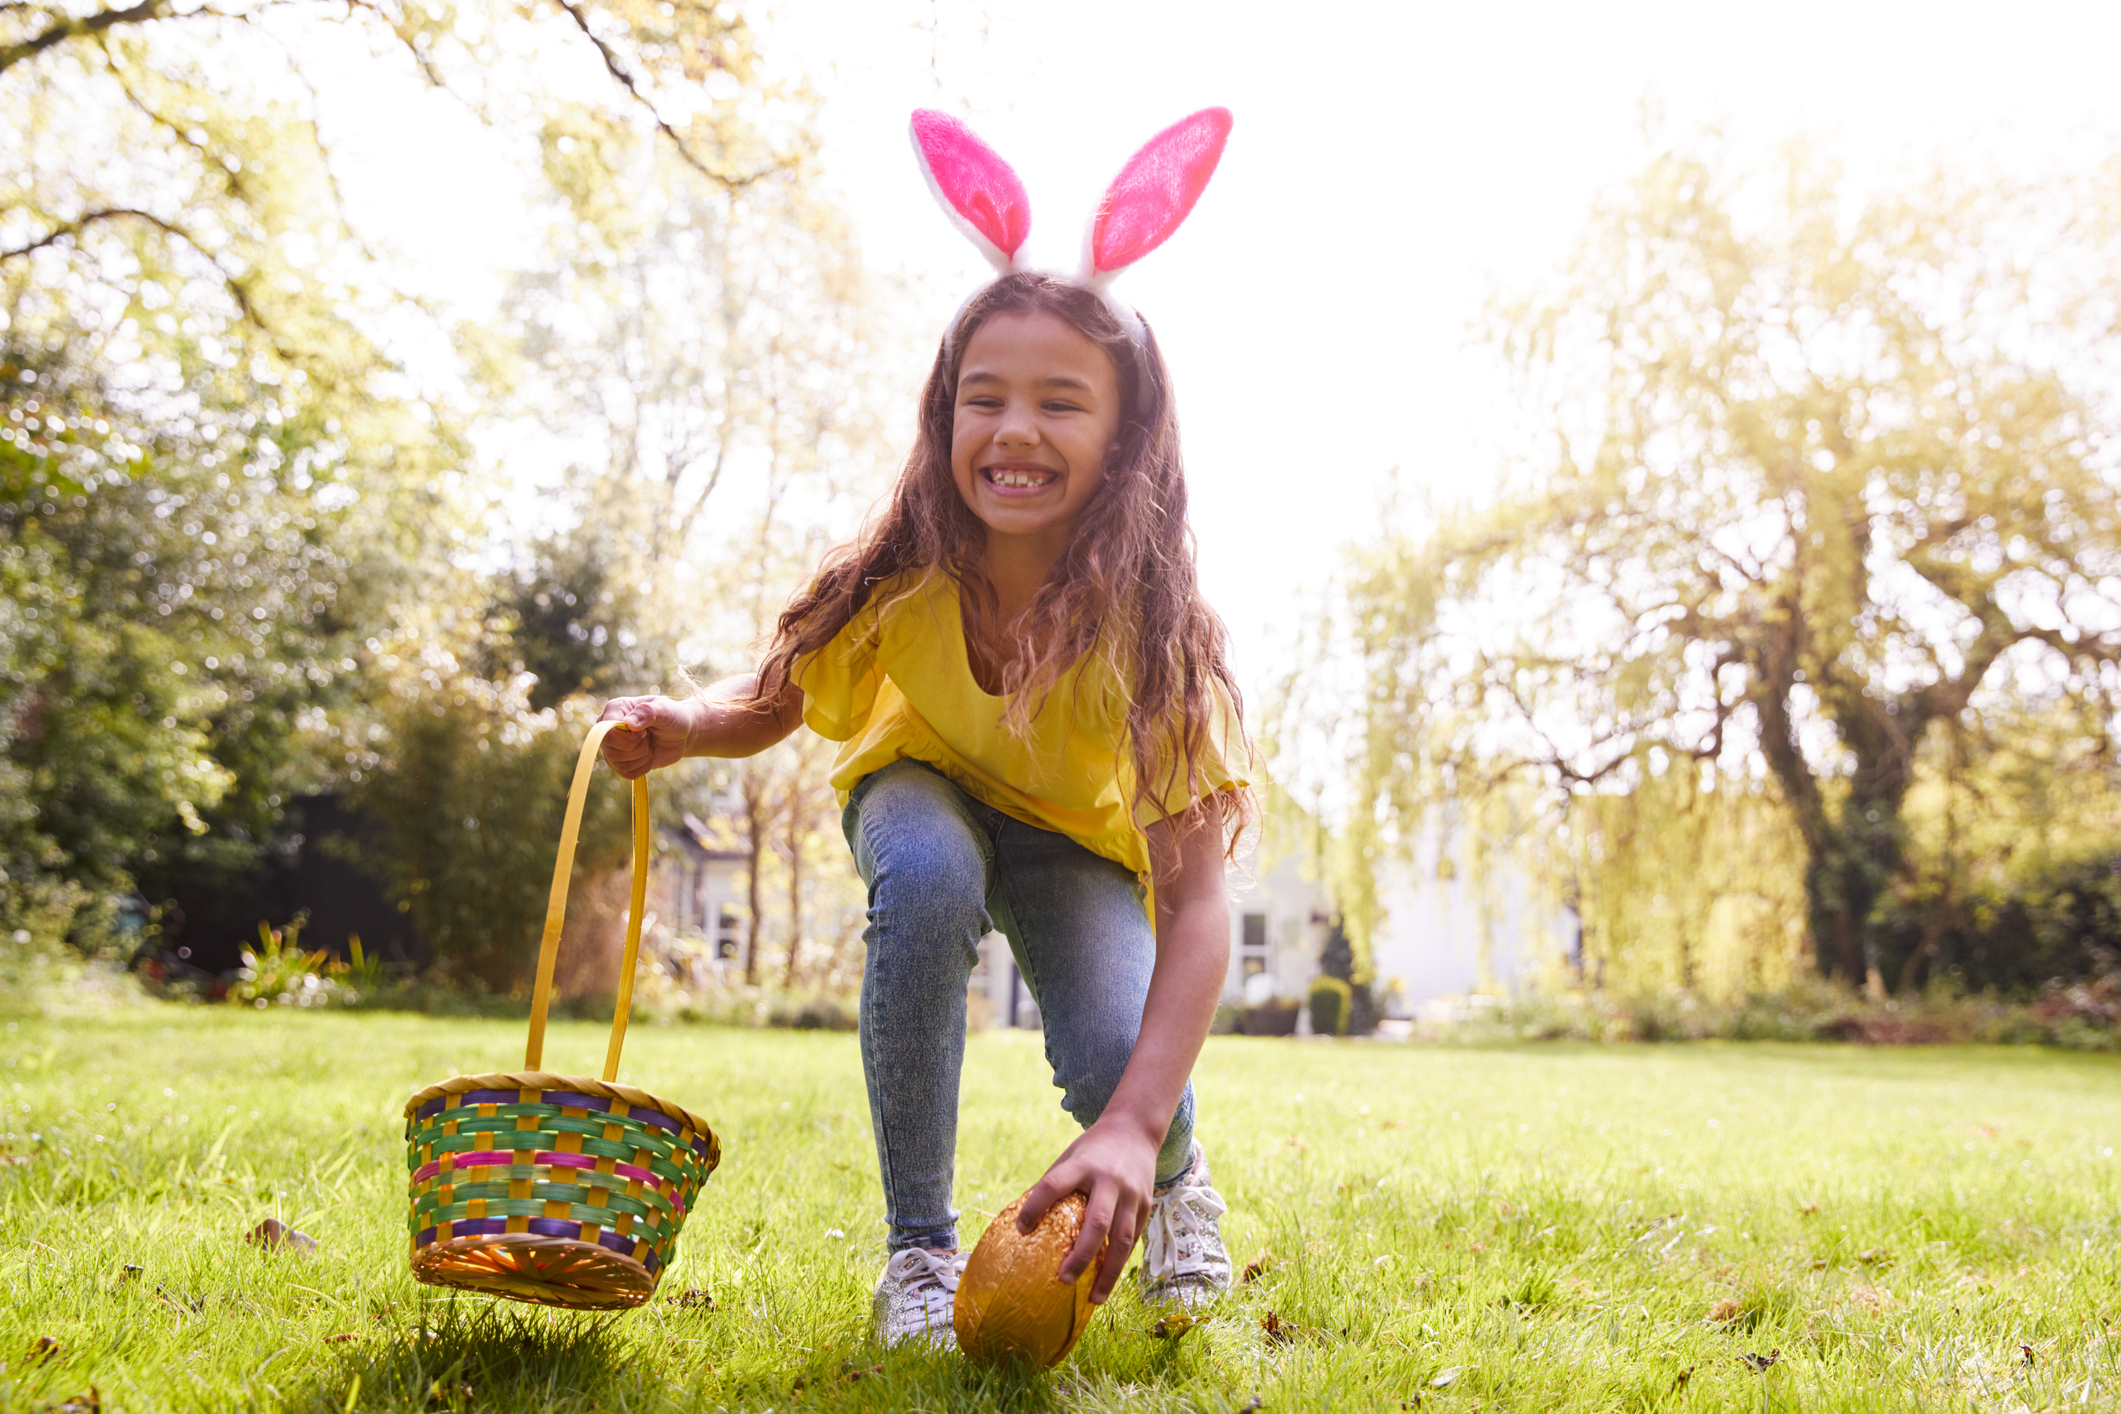 Celebrate Spring in Garland with the latest Easter 2021 Celebration Ideas From Northstar Plaza